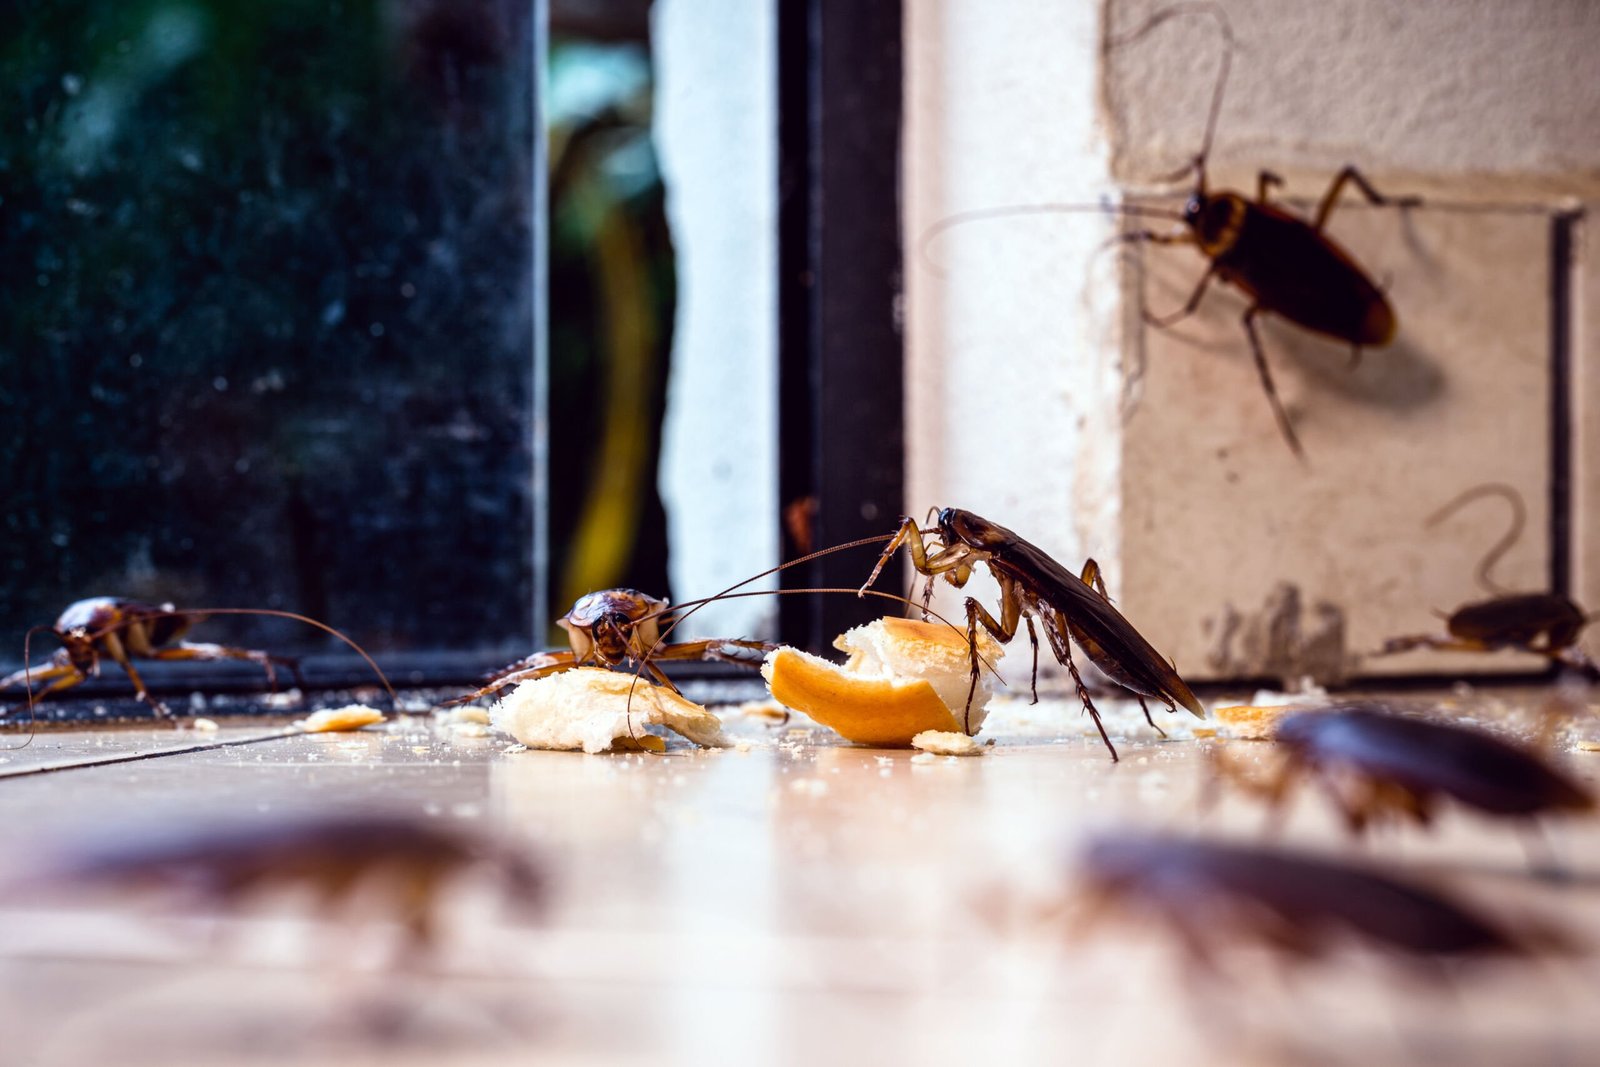 Tips to Prevent Roaches in your Home